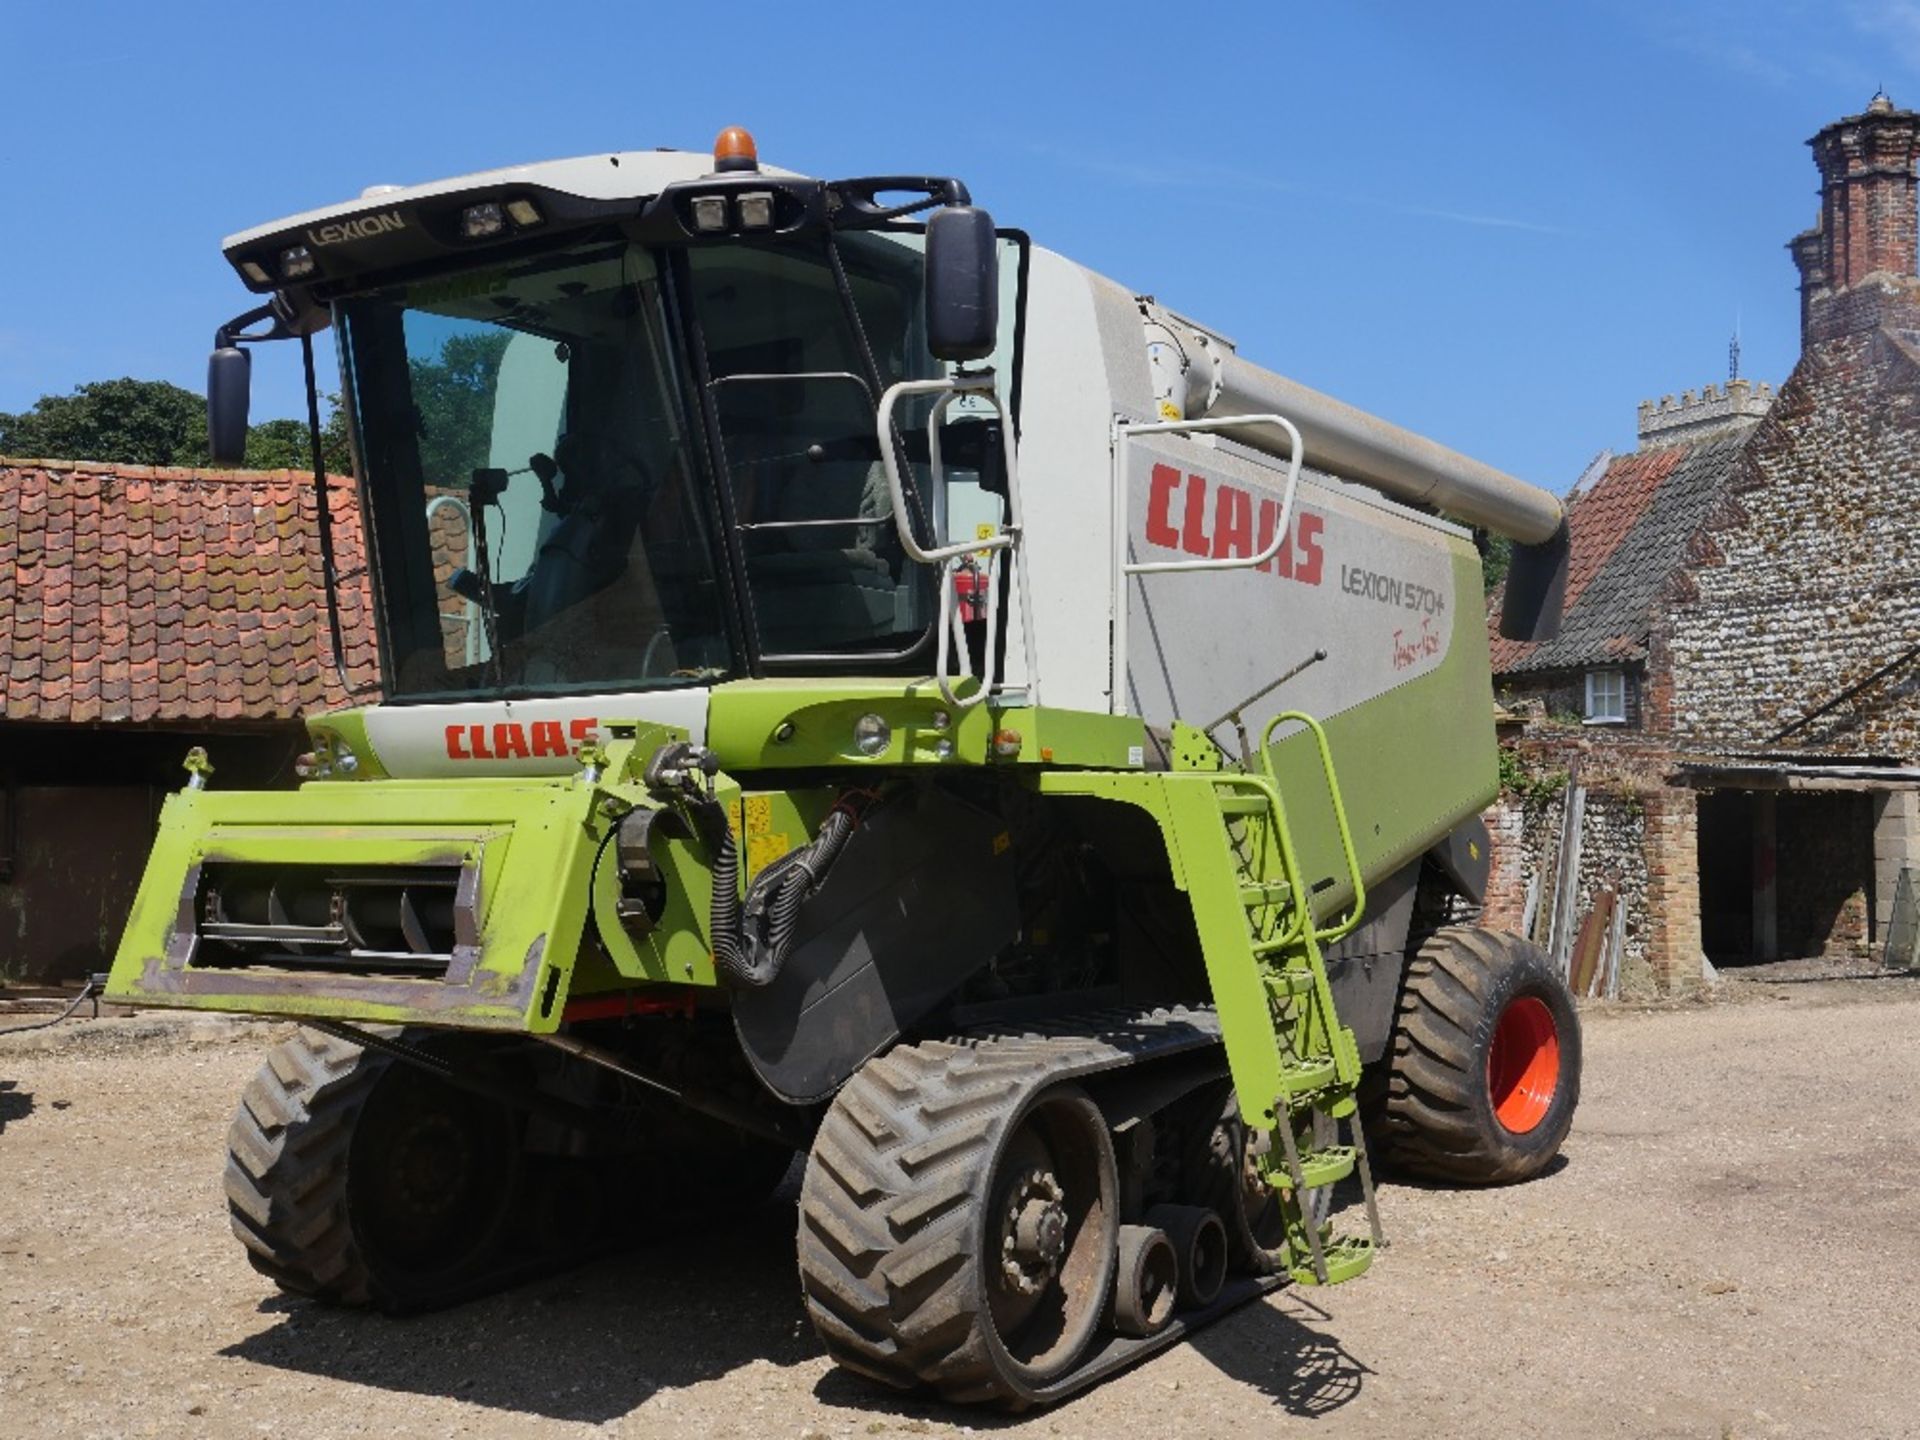 2006 Claas Lexion 570 + Terra Trac, 25ft Header with Trolley, Rear Tyres: 710/45- 26. - Image 4 of 5